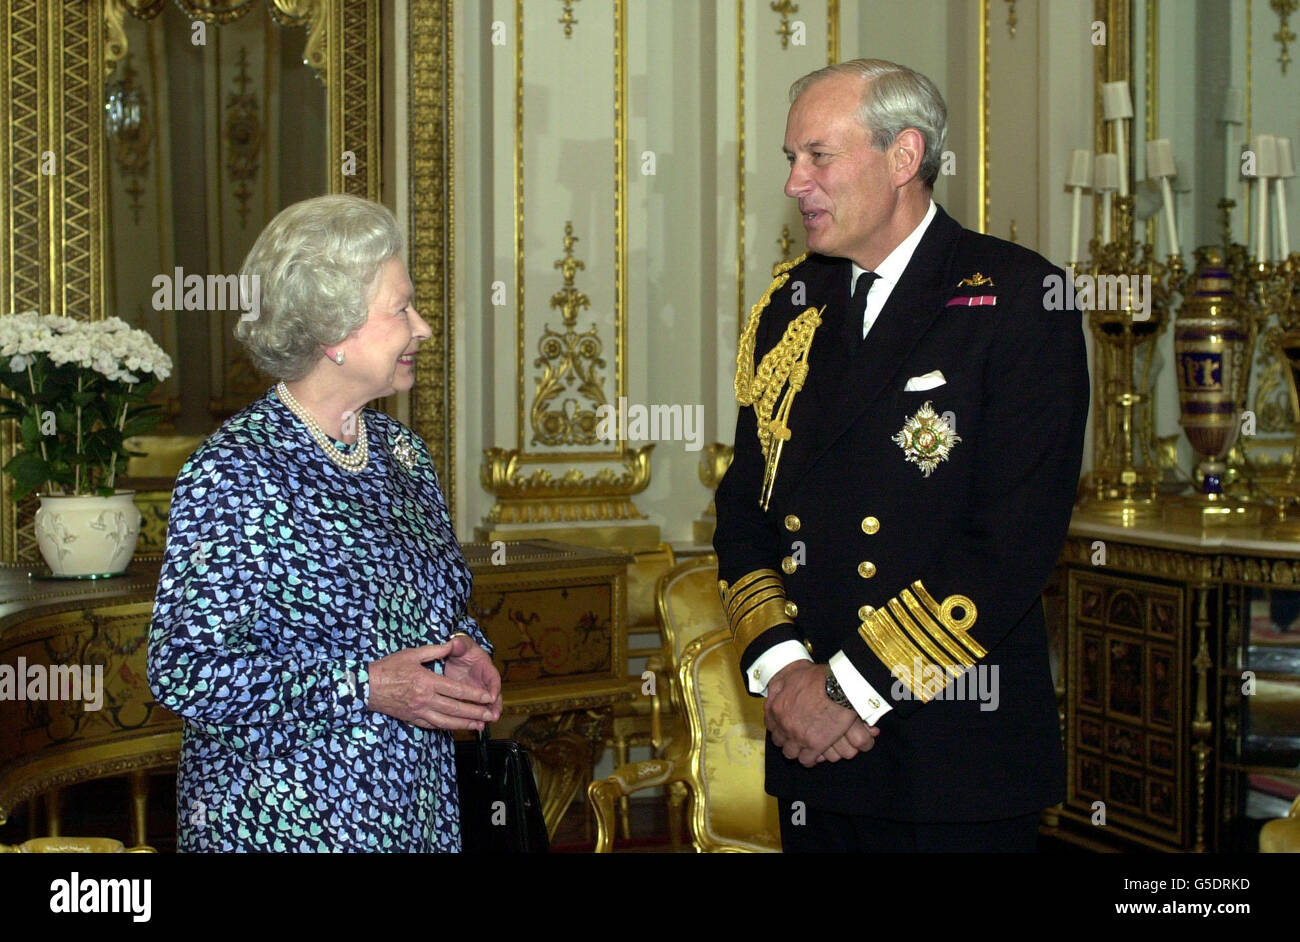 Britain's Queen Elizabeth II receiving Admiral Sir Michael Boyce on assumng the appointment of the Chief of the Defence Staff, at Buckingham Palace, London. Stock Photo